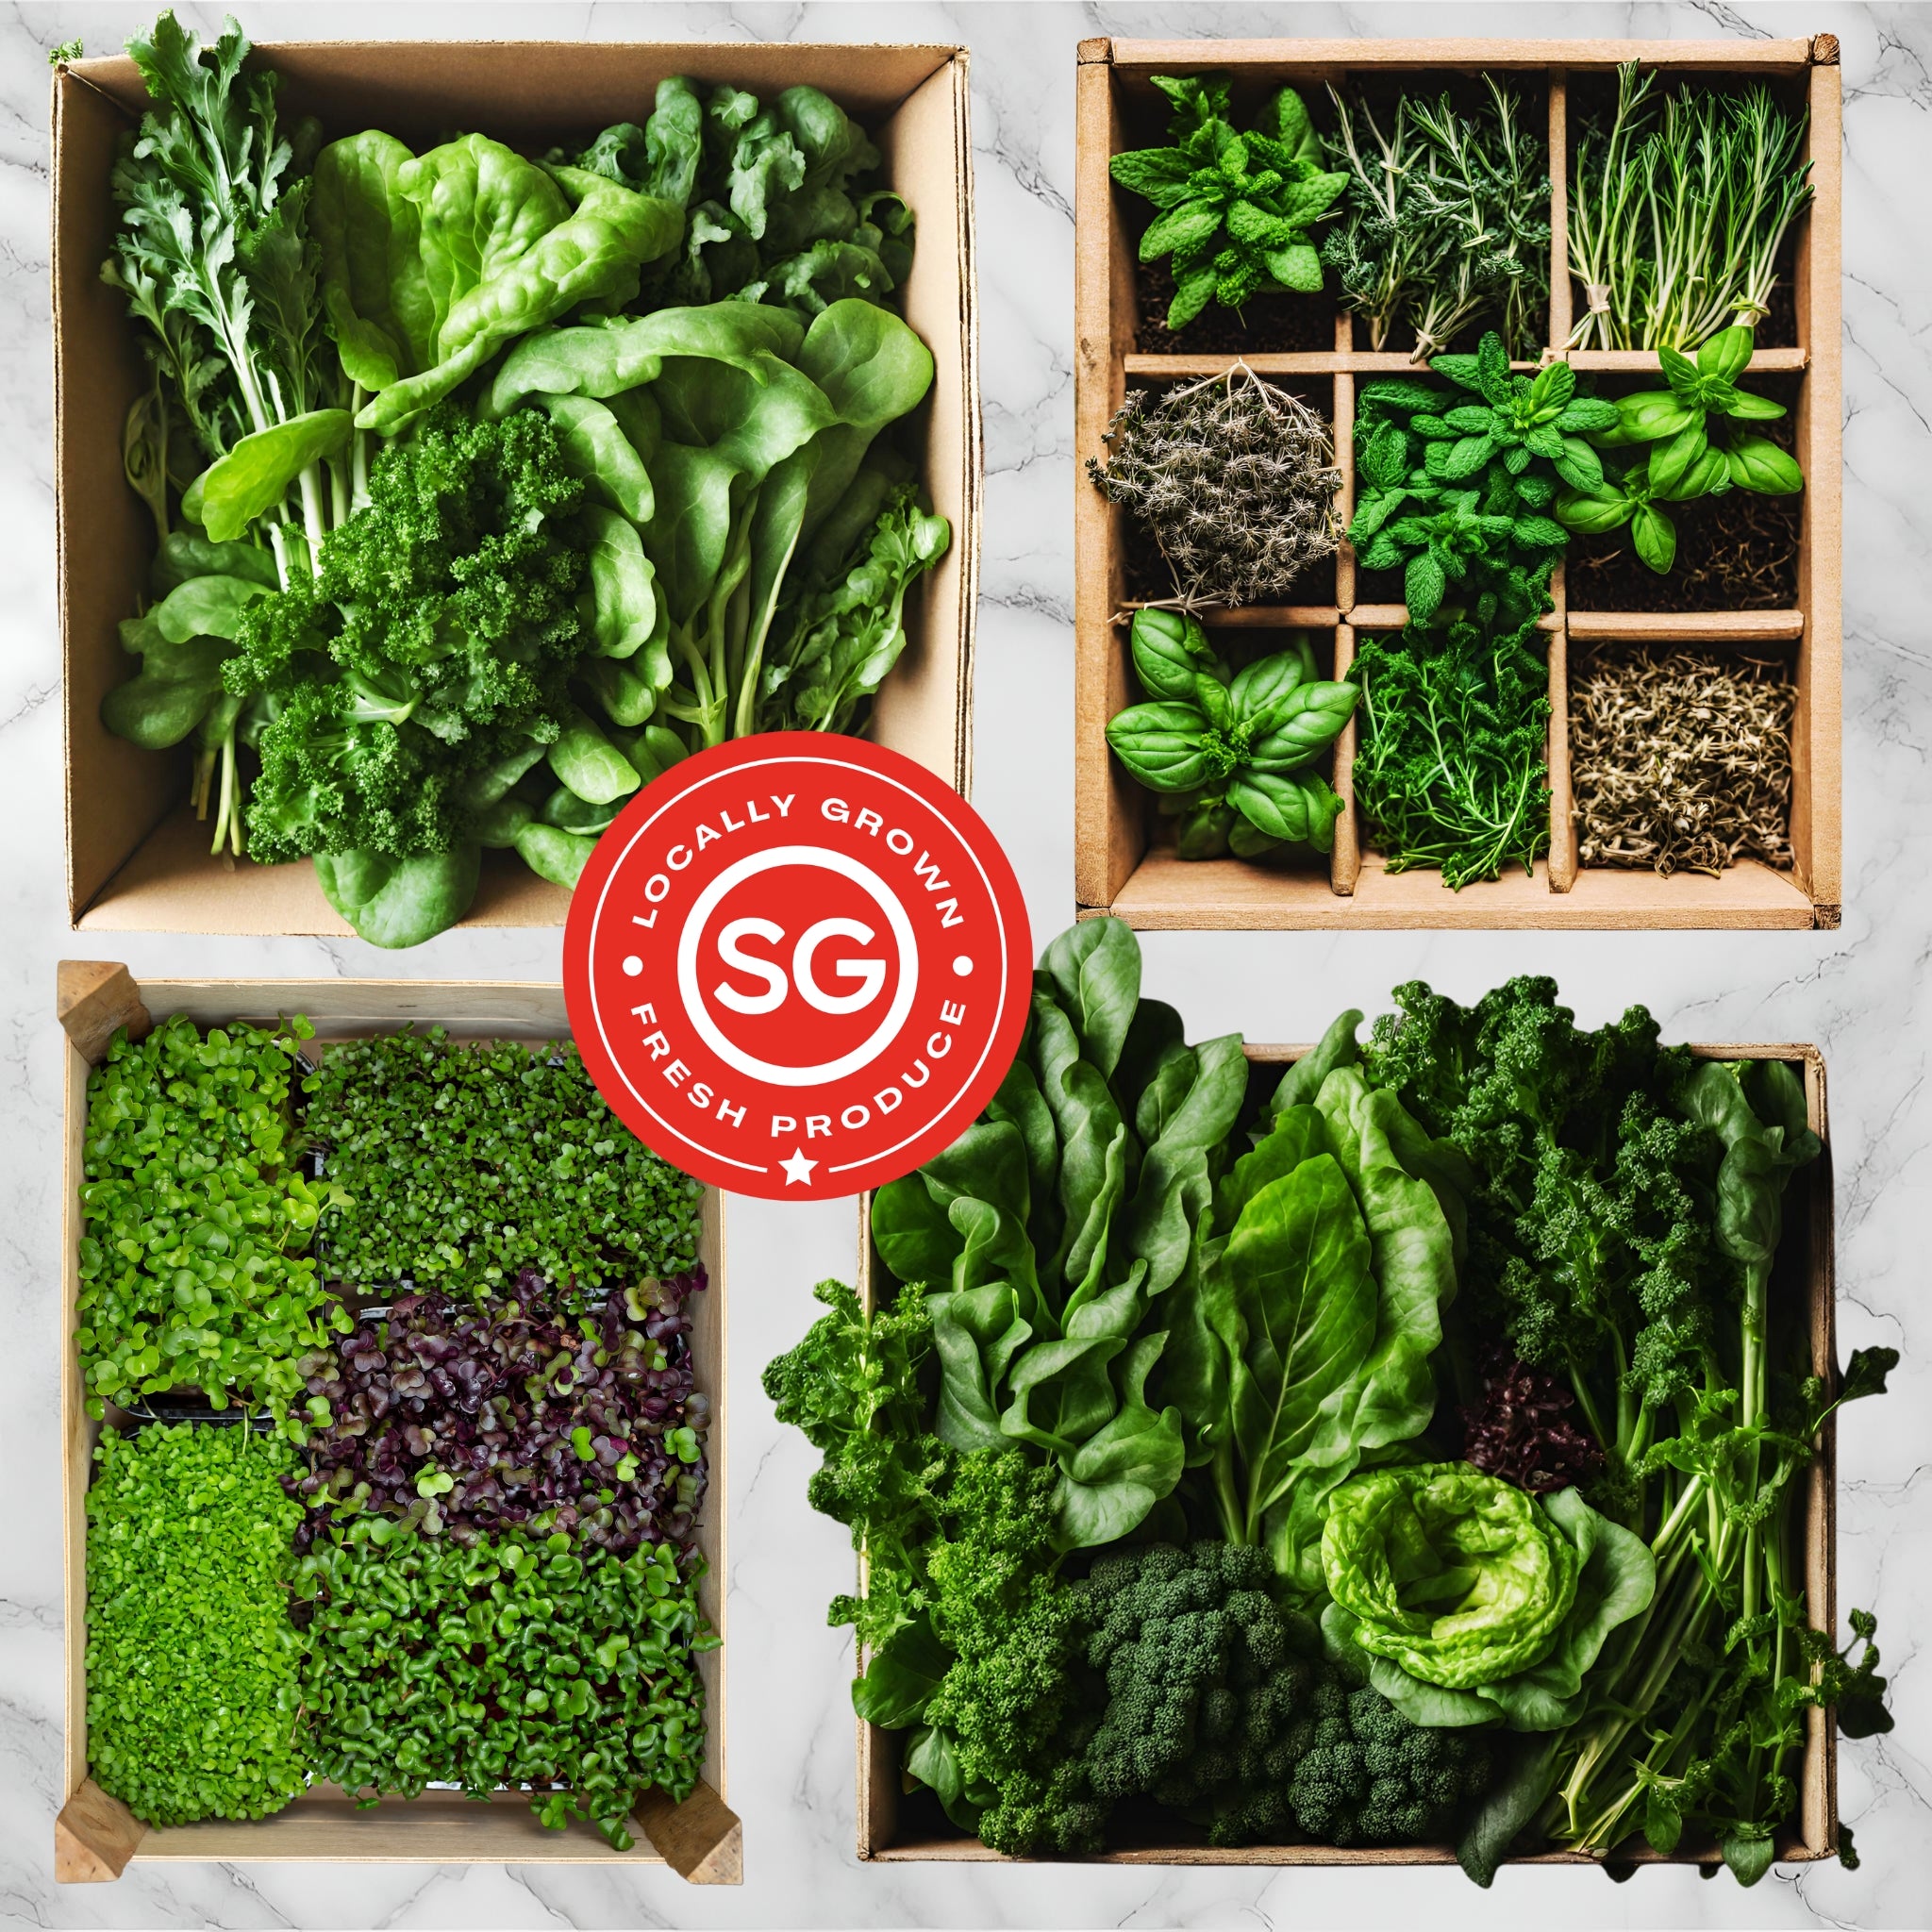 Subscription box for weekly delivery of the freshest, most nutritious, organic local produce available in Singapore. Receive leafy greens, herbs, fruit plants, microgreens & more.